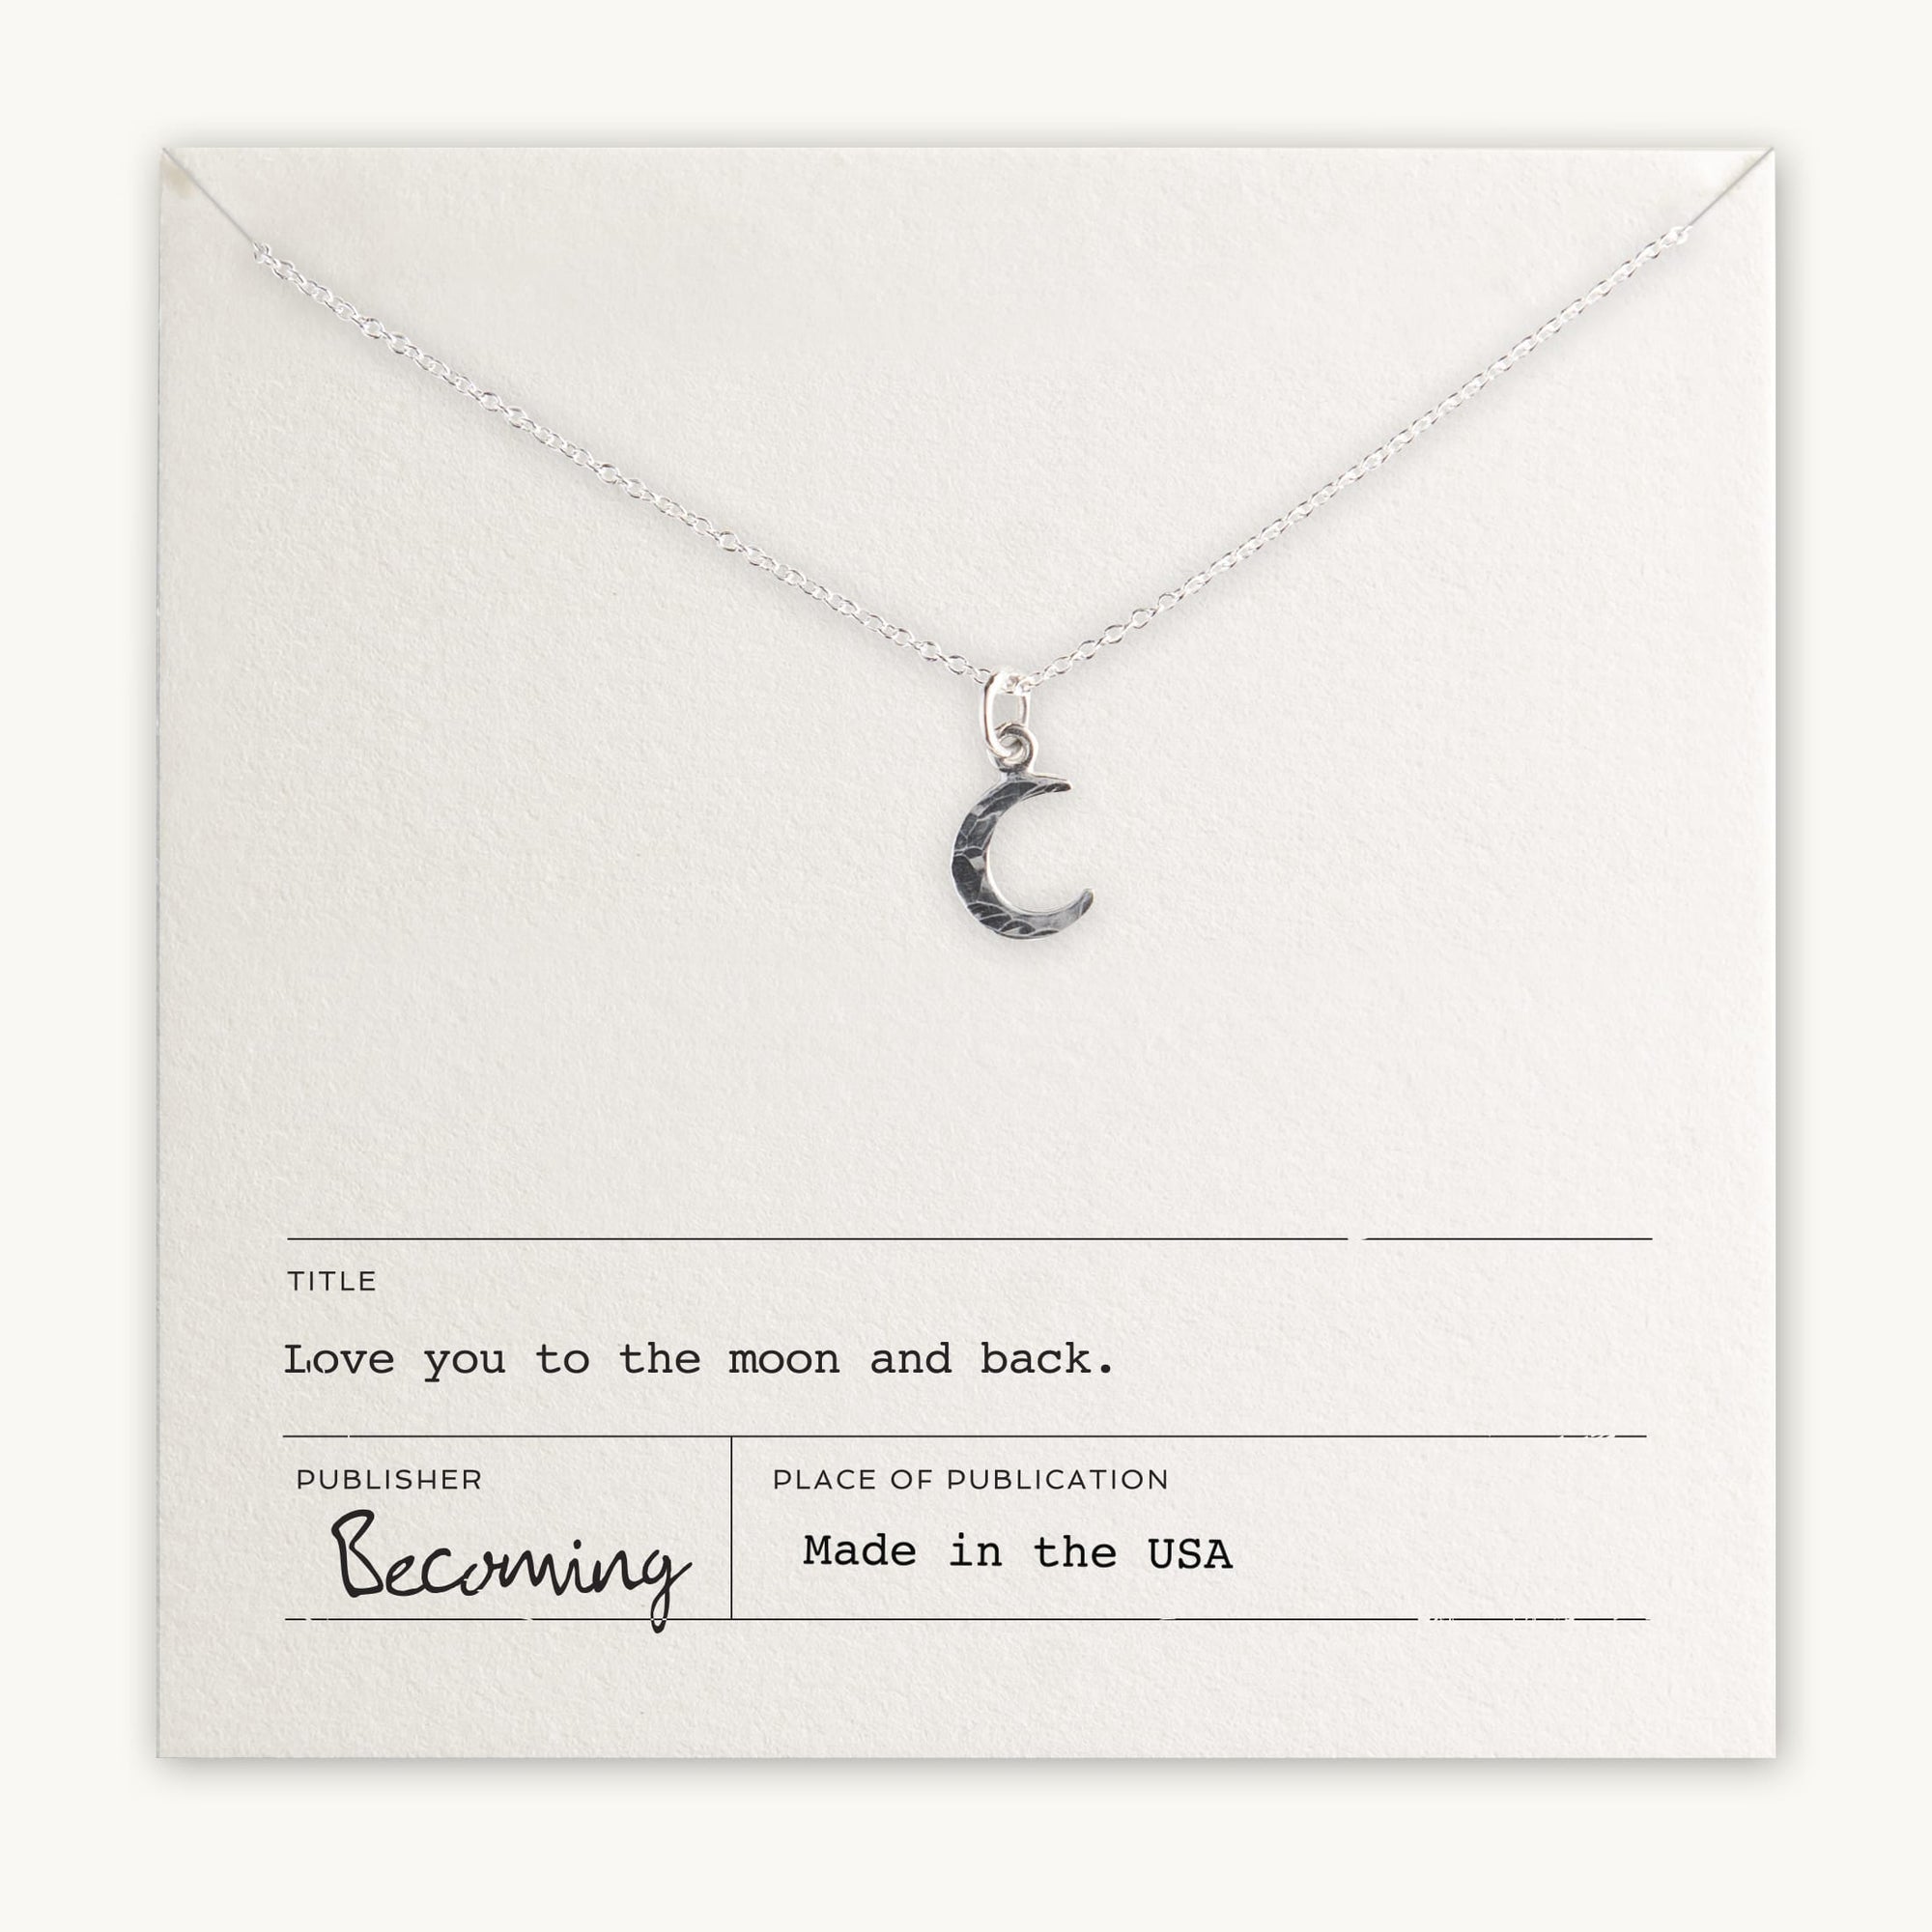 Becoming Jewelry&#39;s Love You To The Moon Necklace displayed on a card with the inscription &quot;love you to the moon and back.&quot; made in the USA.